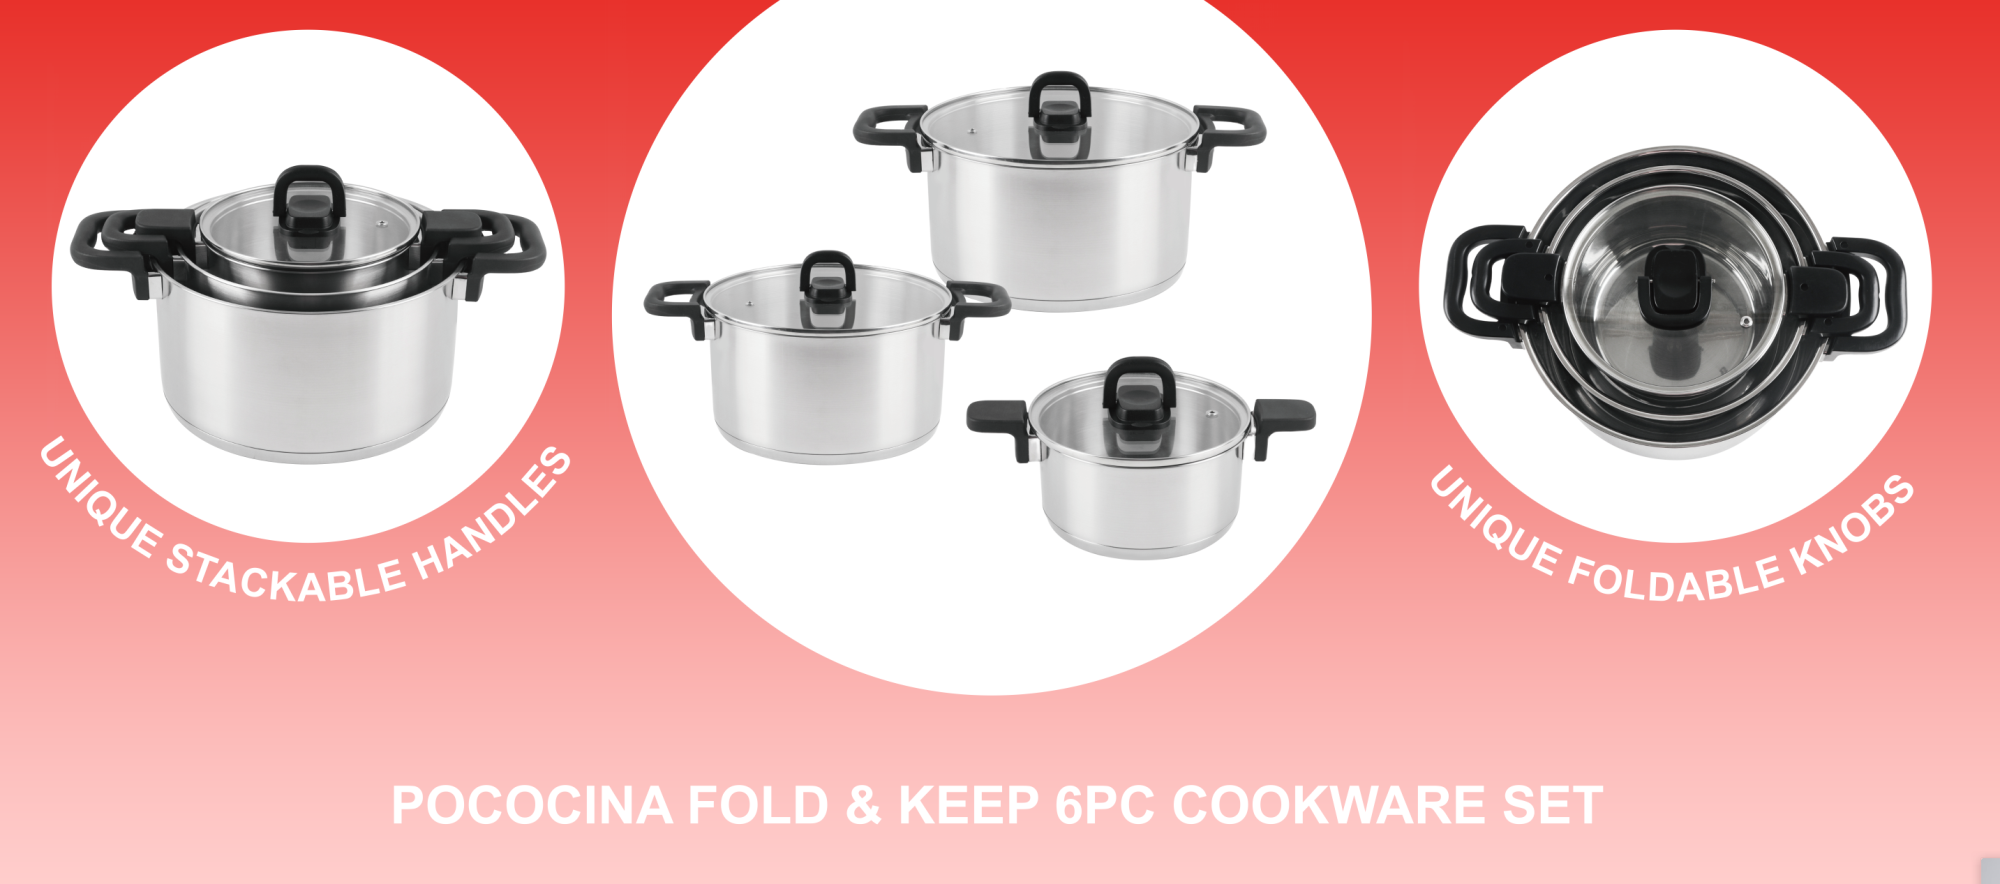 Forged aluminum cookware